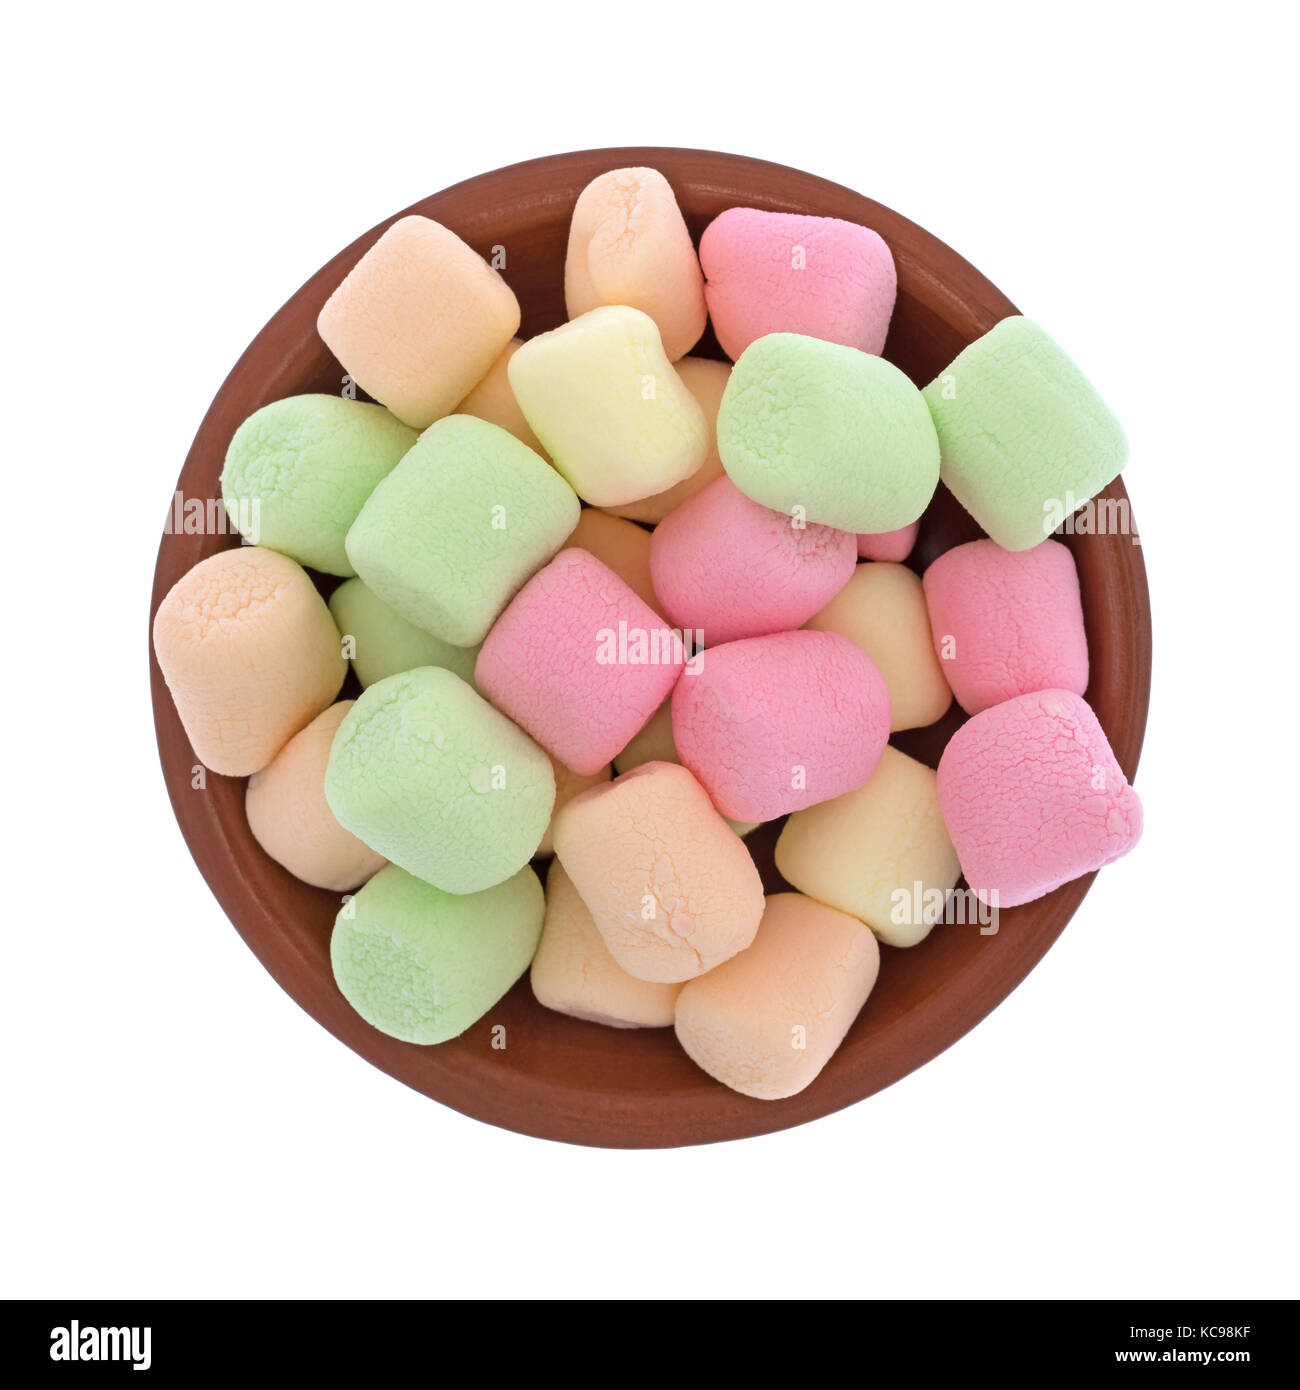 Top view of a small red clay bowl filled with colorful pastel hued miniature green, pink, yellow and orange marshmallows isolated on a white backgroun Stock Photo